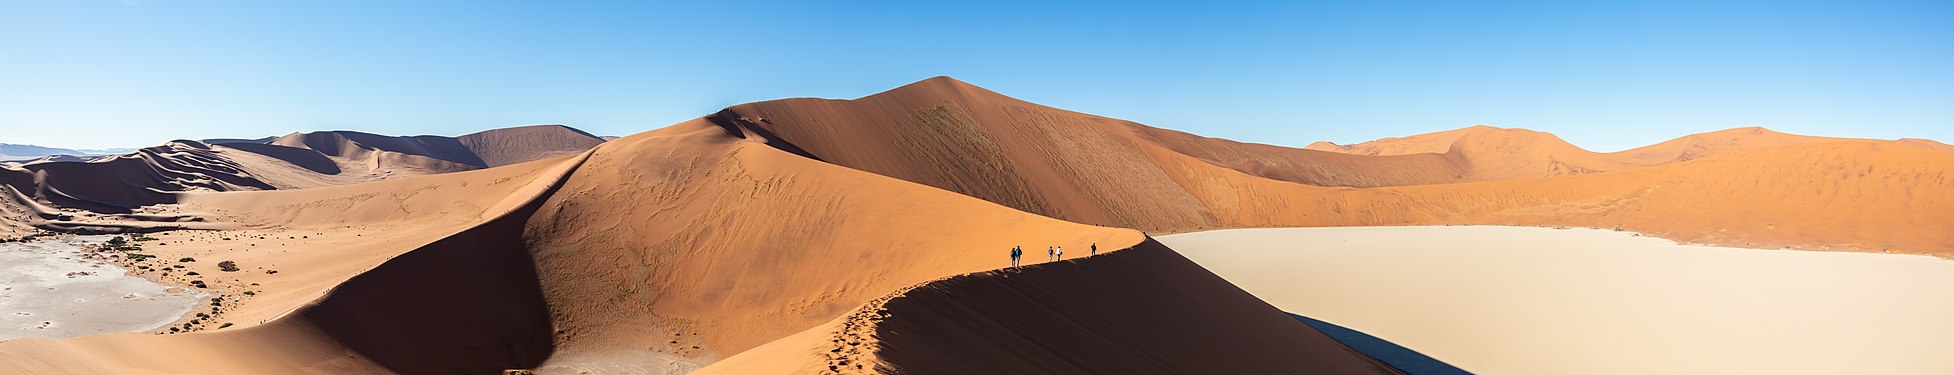 Big Daddy Dune and Dead Vlei, Sossusvlei, Namibia.